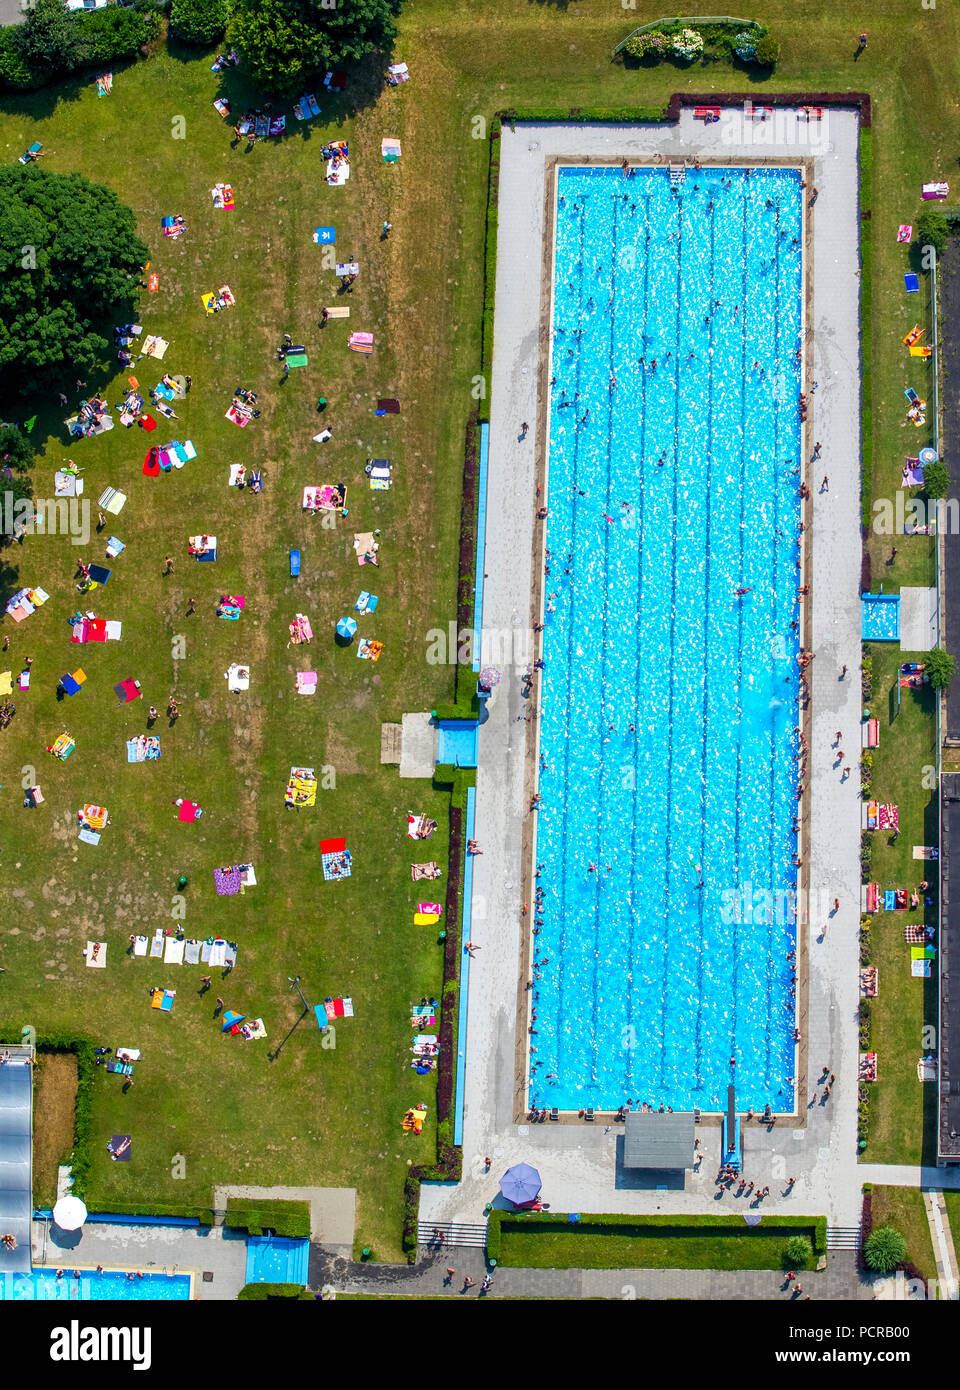 Outdoor swimming pool Werne with swimming pool, paddling pool and sunbathing area with shadow, Bochum, Ruhr area, North Rhine-Westphalia, Germany Stock Photo